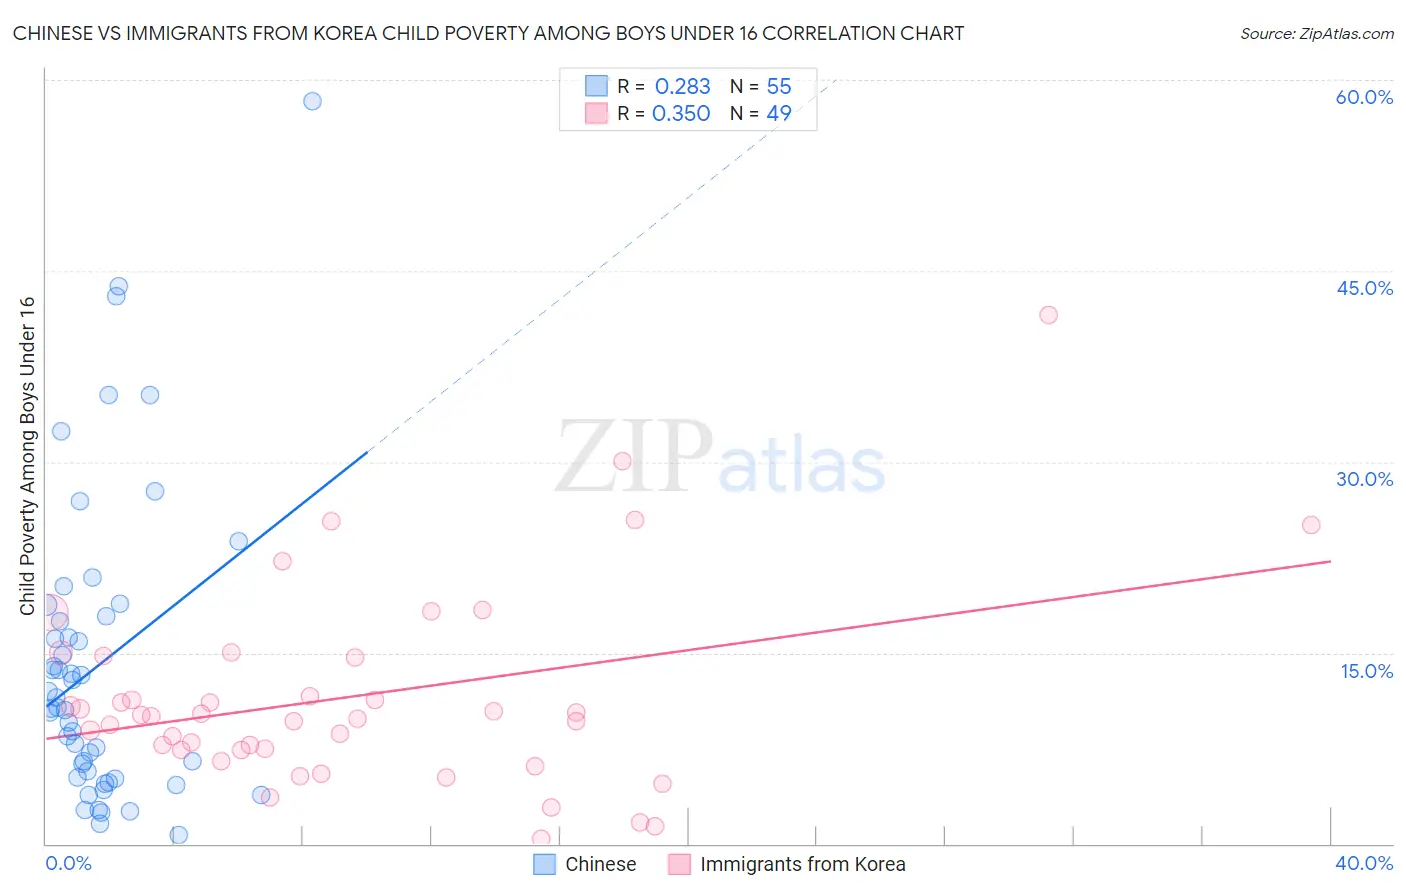 Chinese vs Immigrants from Korea Child Poverty Among Boys Under 16